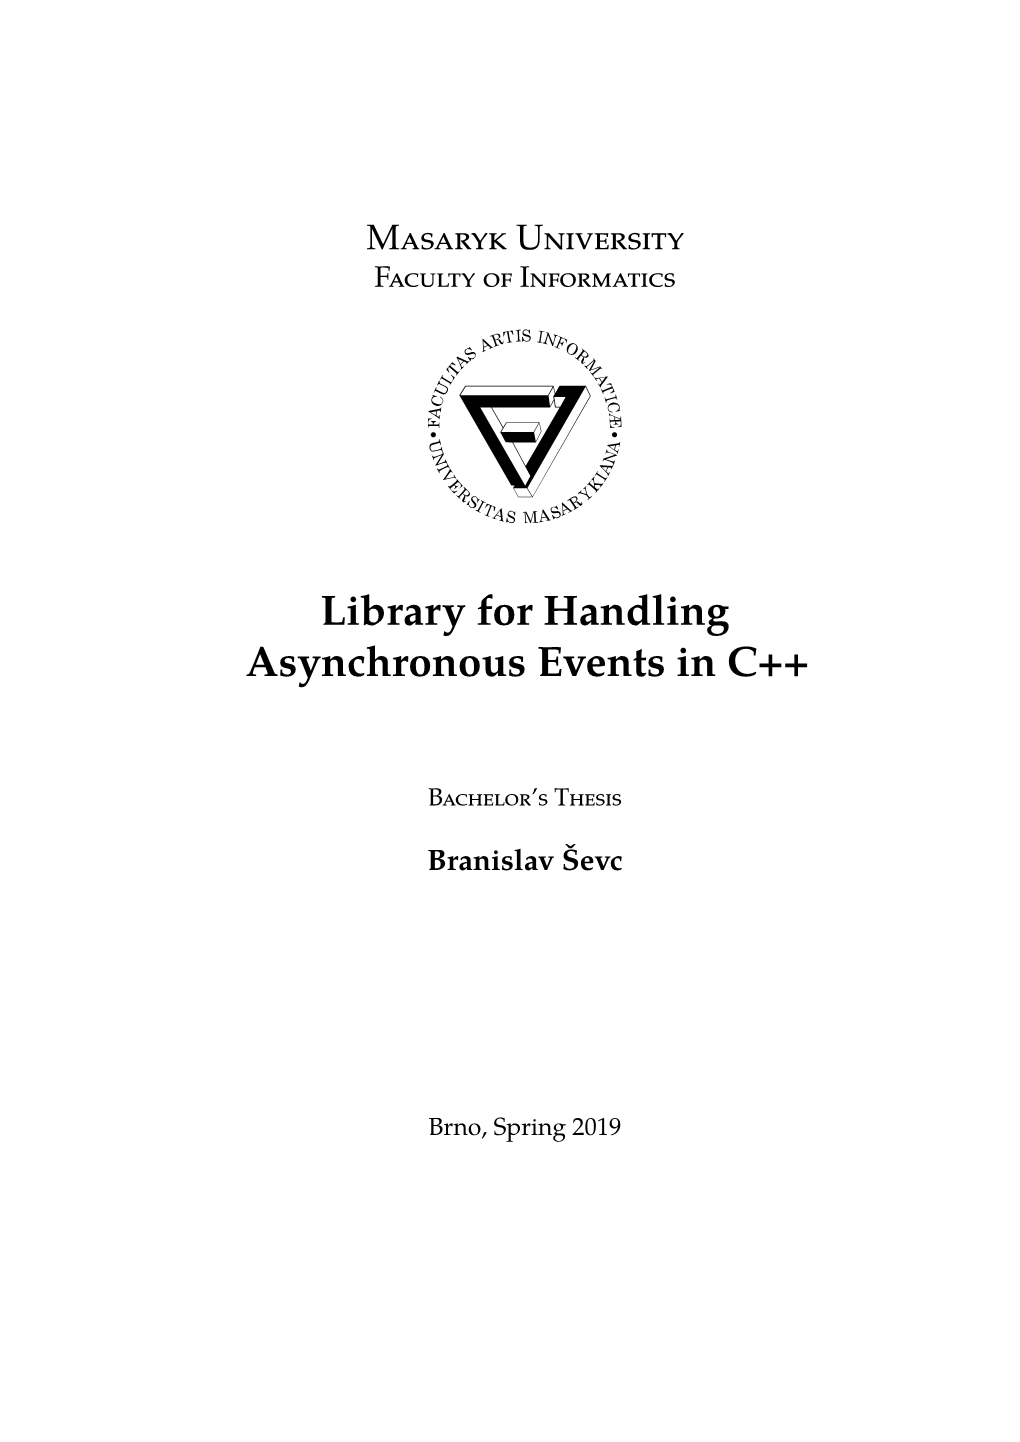 Library for Handling Asynchronous Events in C++